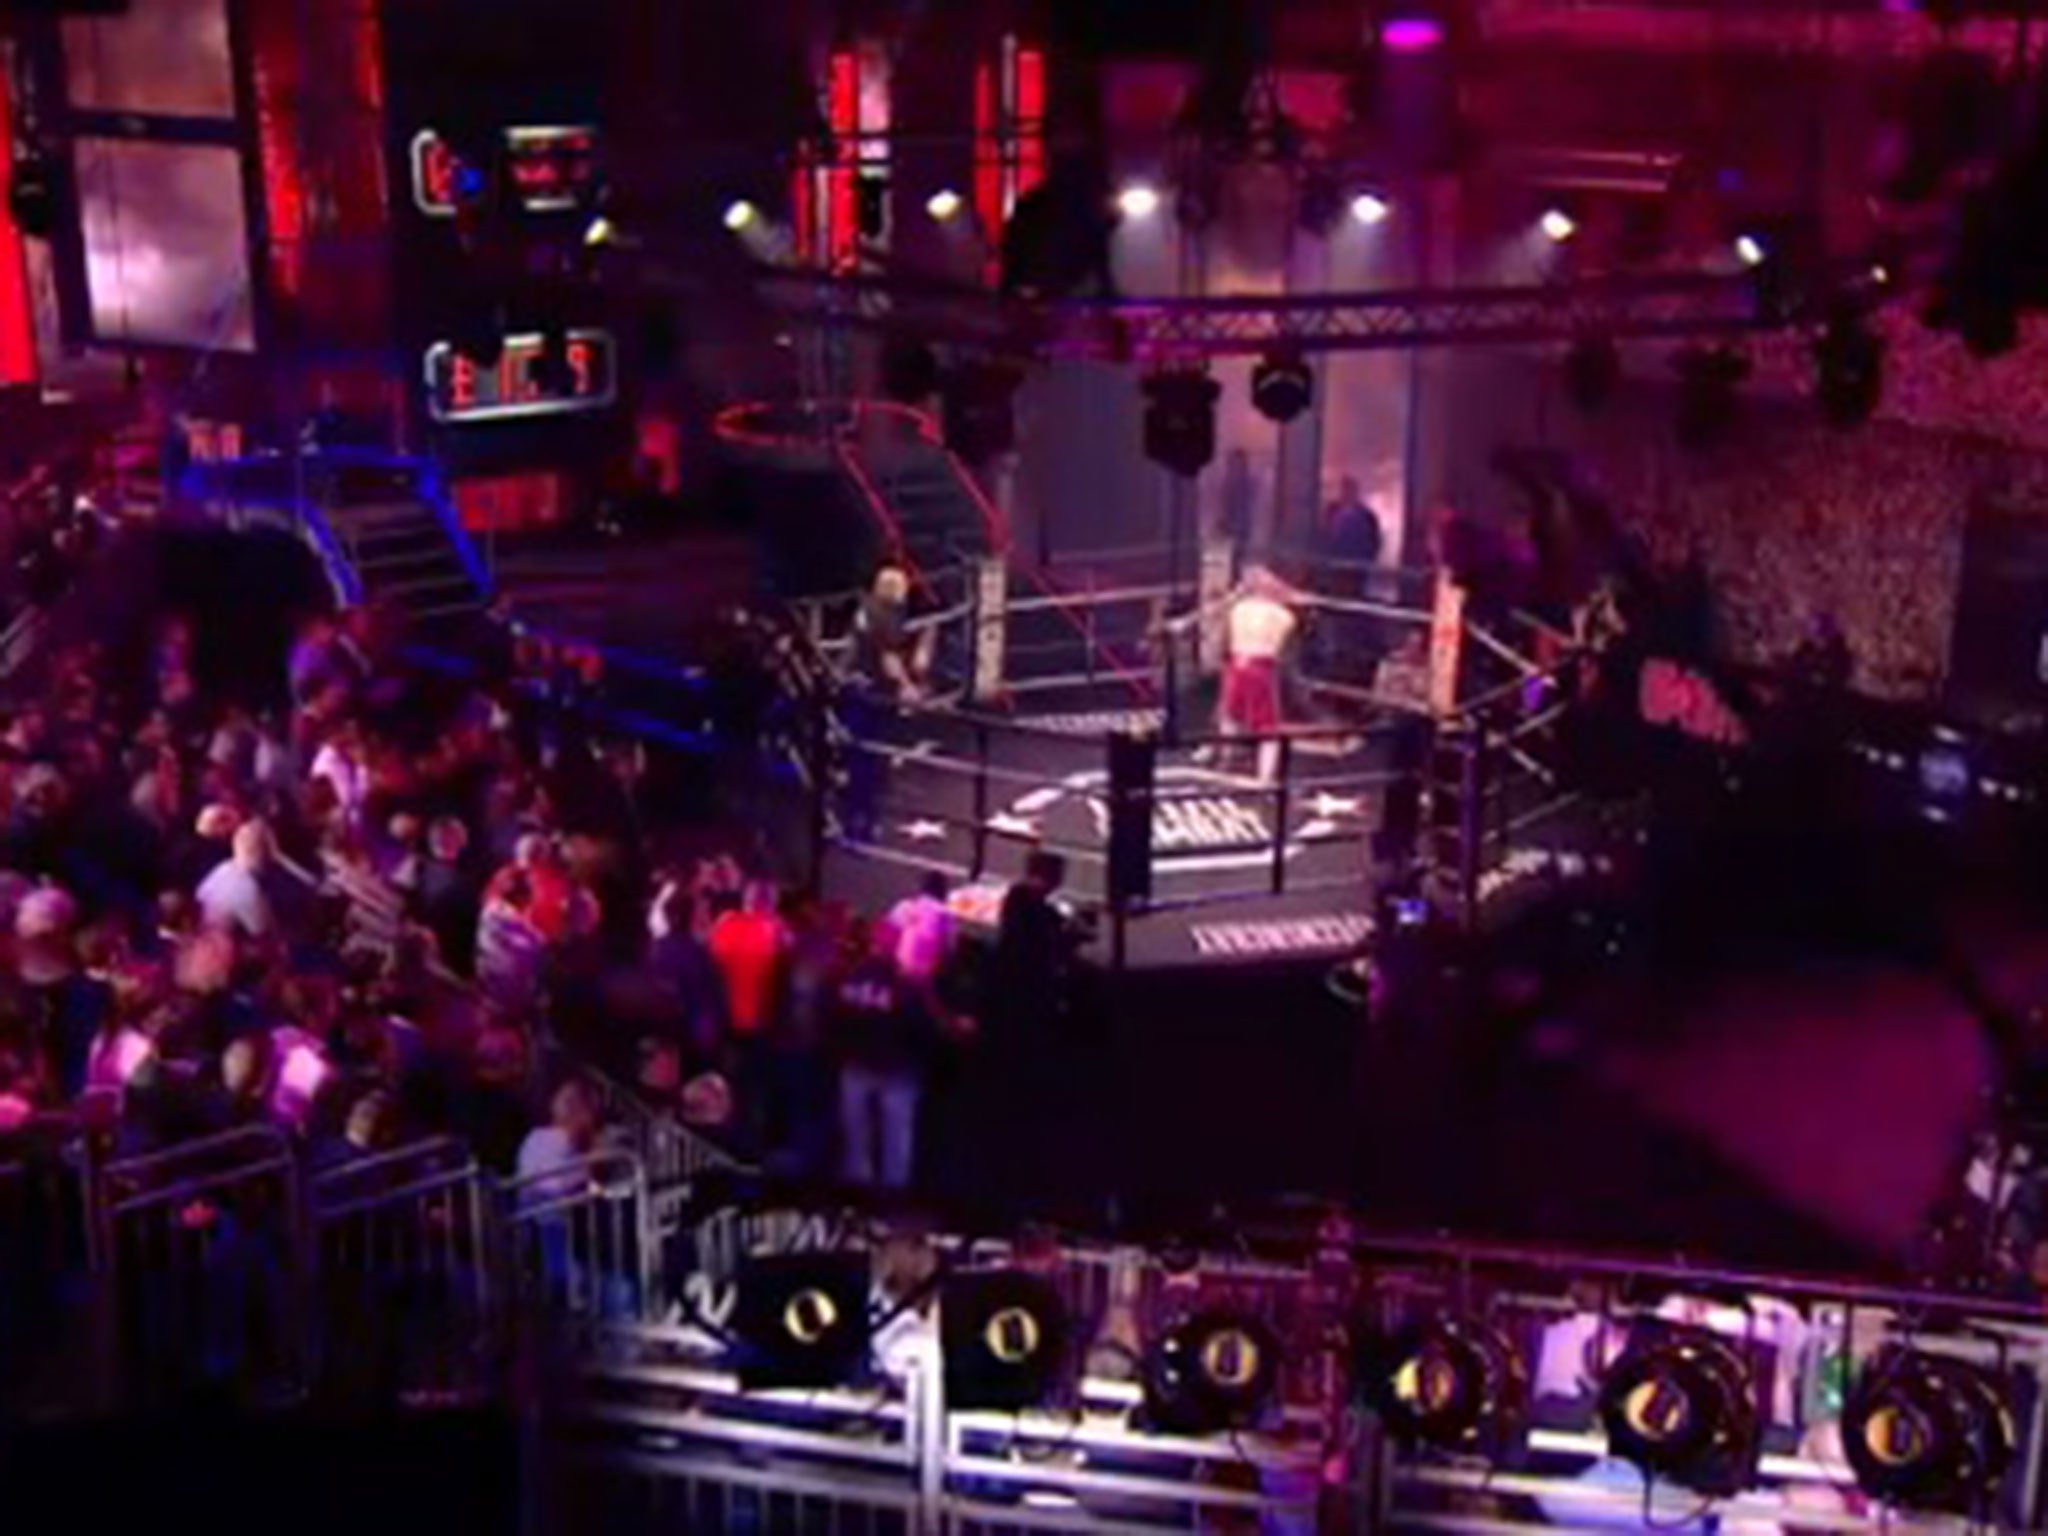 The Total Combat ring in the east London studio the show was recently filmed in